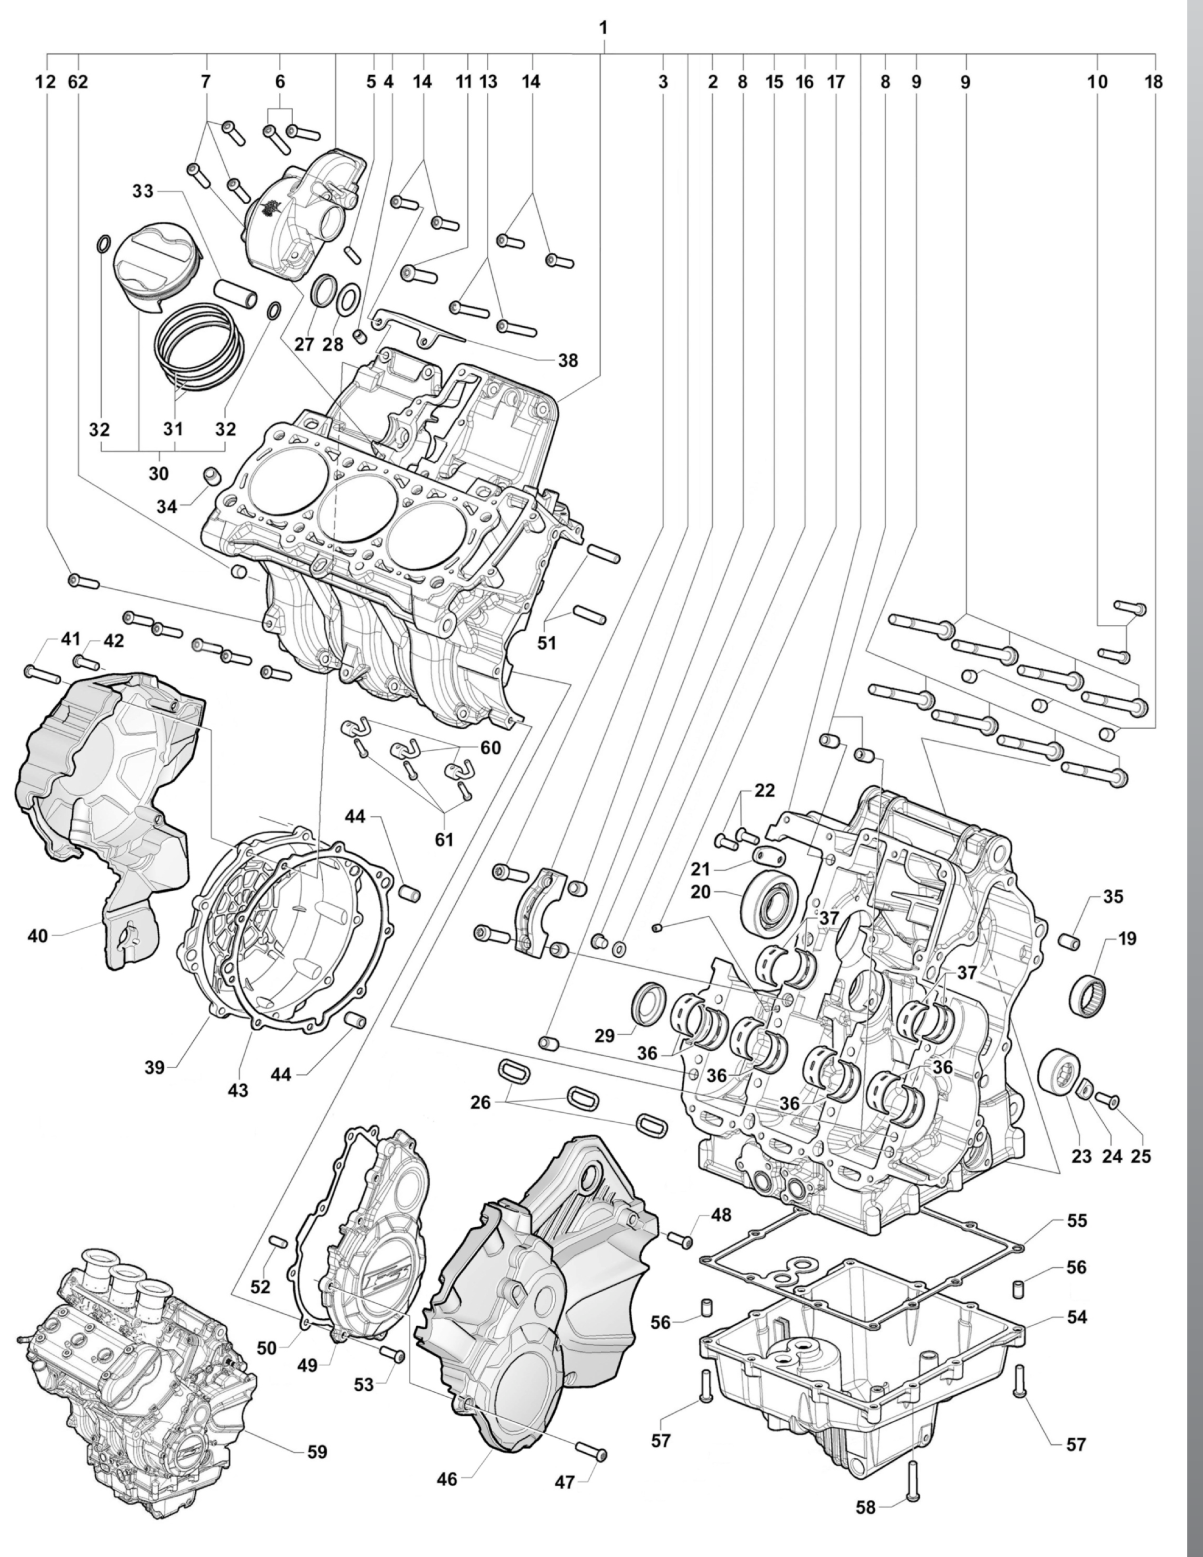 Crankcase And Cylinder Assembly


